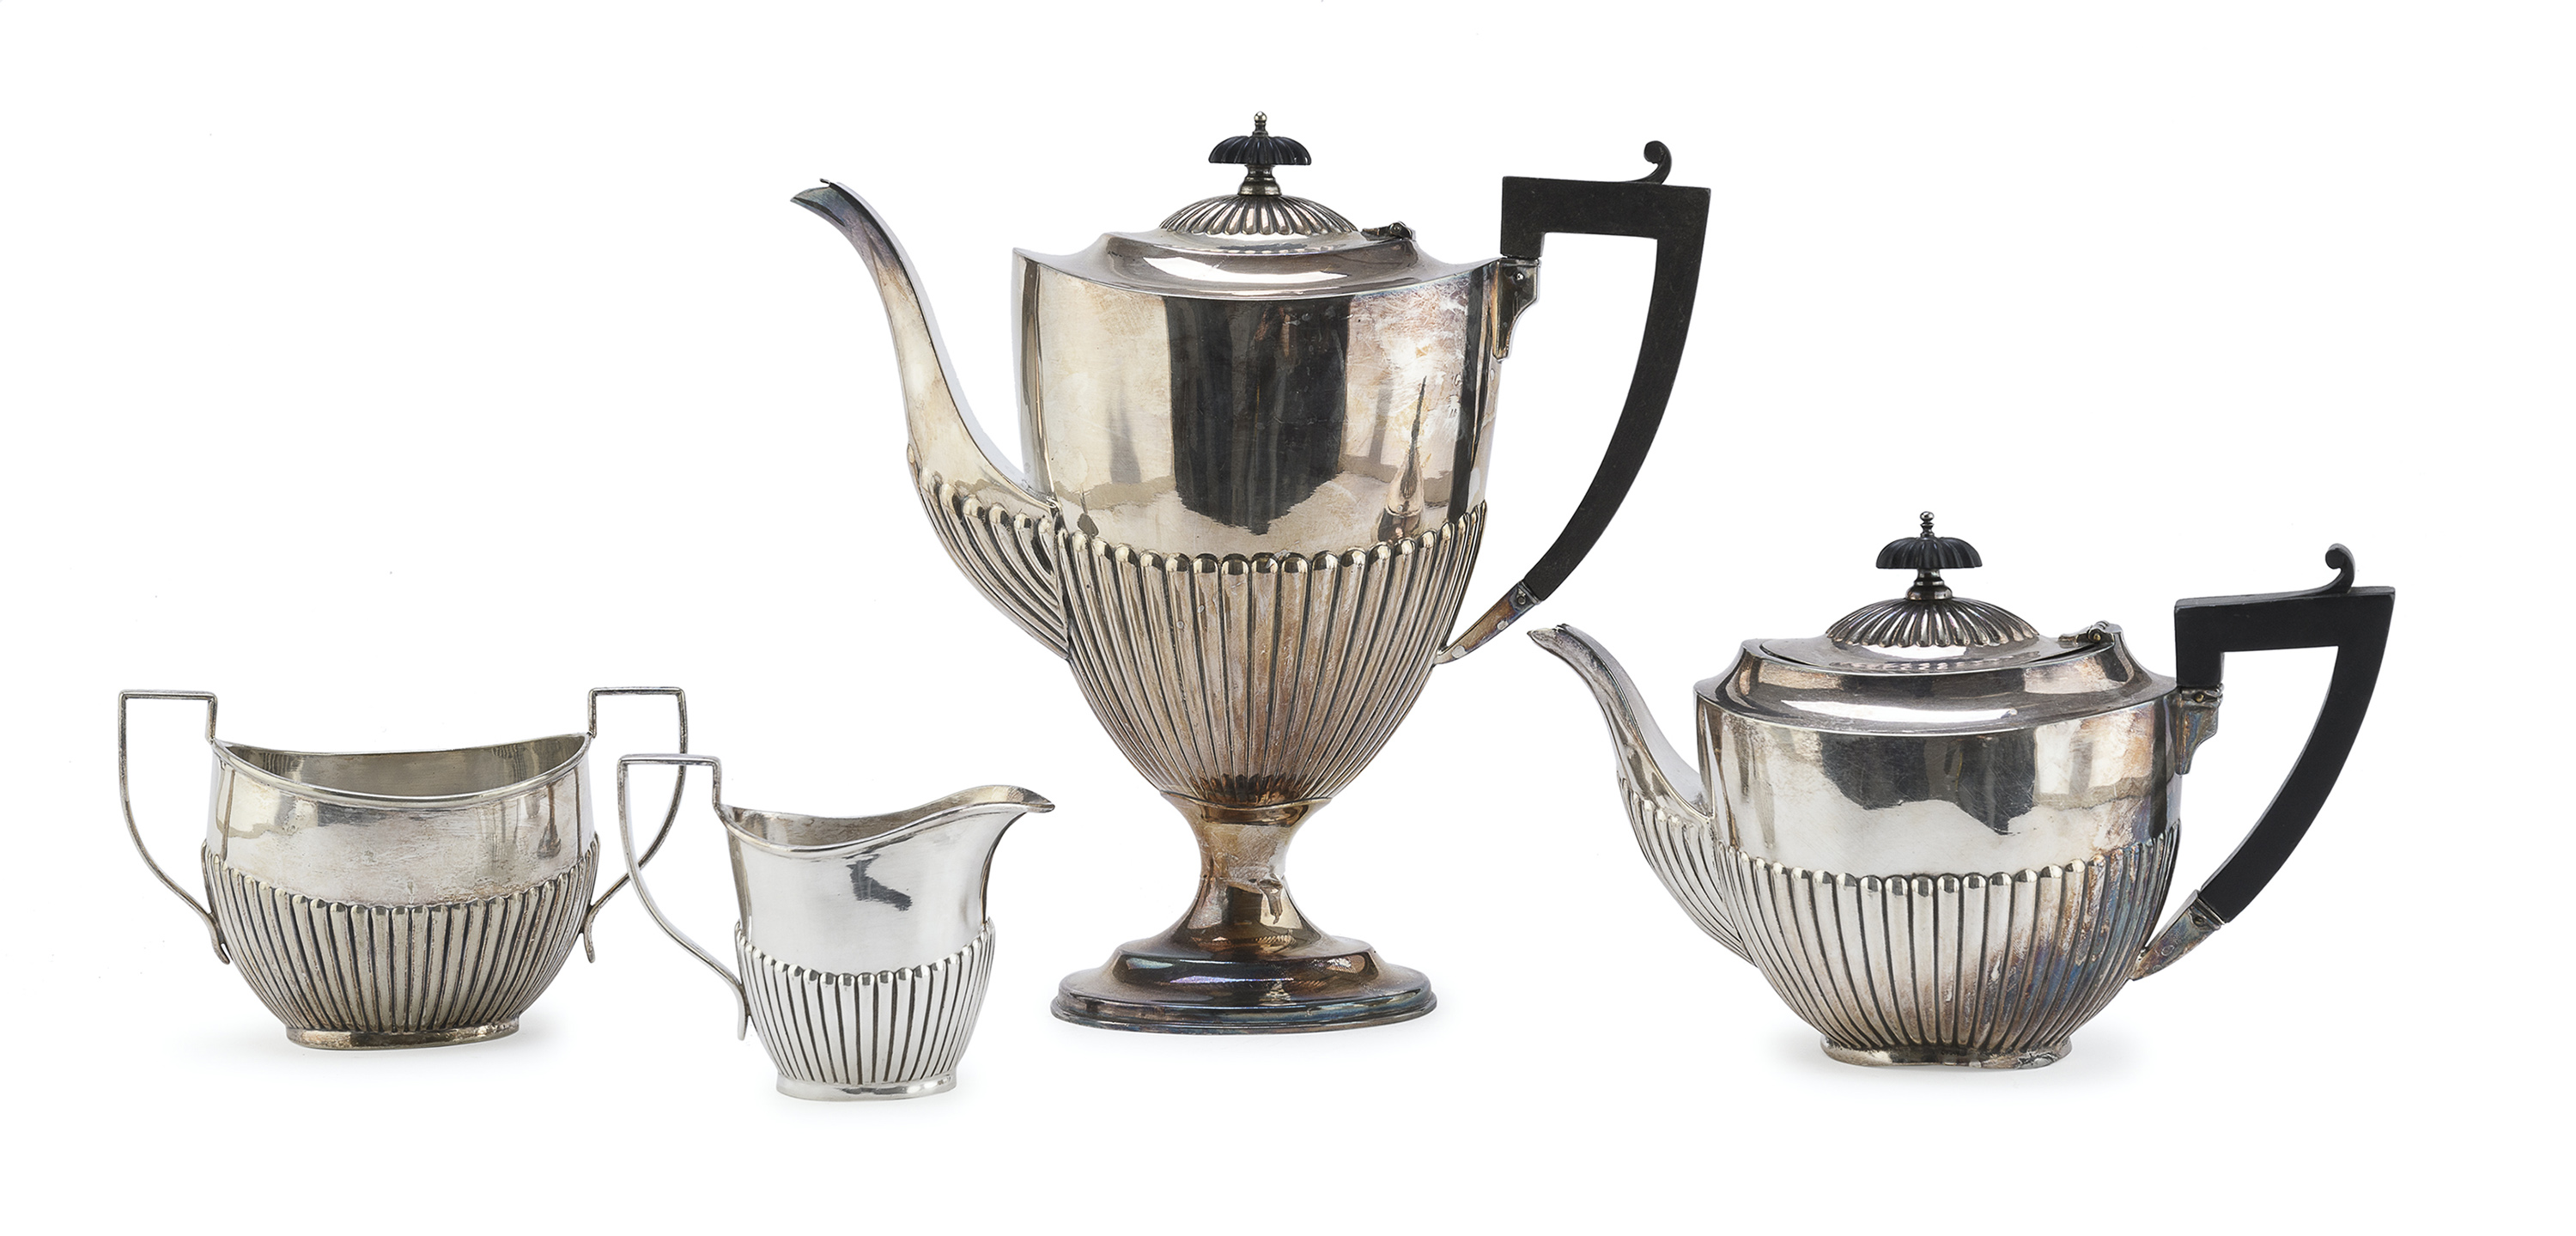 SILVER-PLATED TEA SET UK EARLY 20TH CENTURY